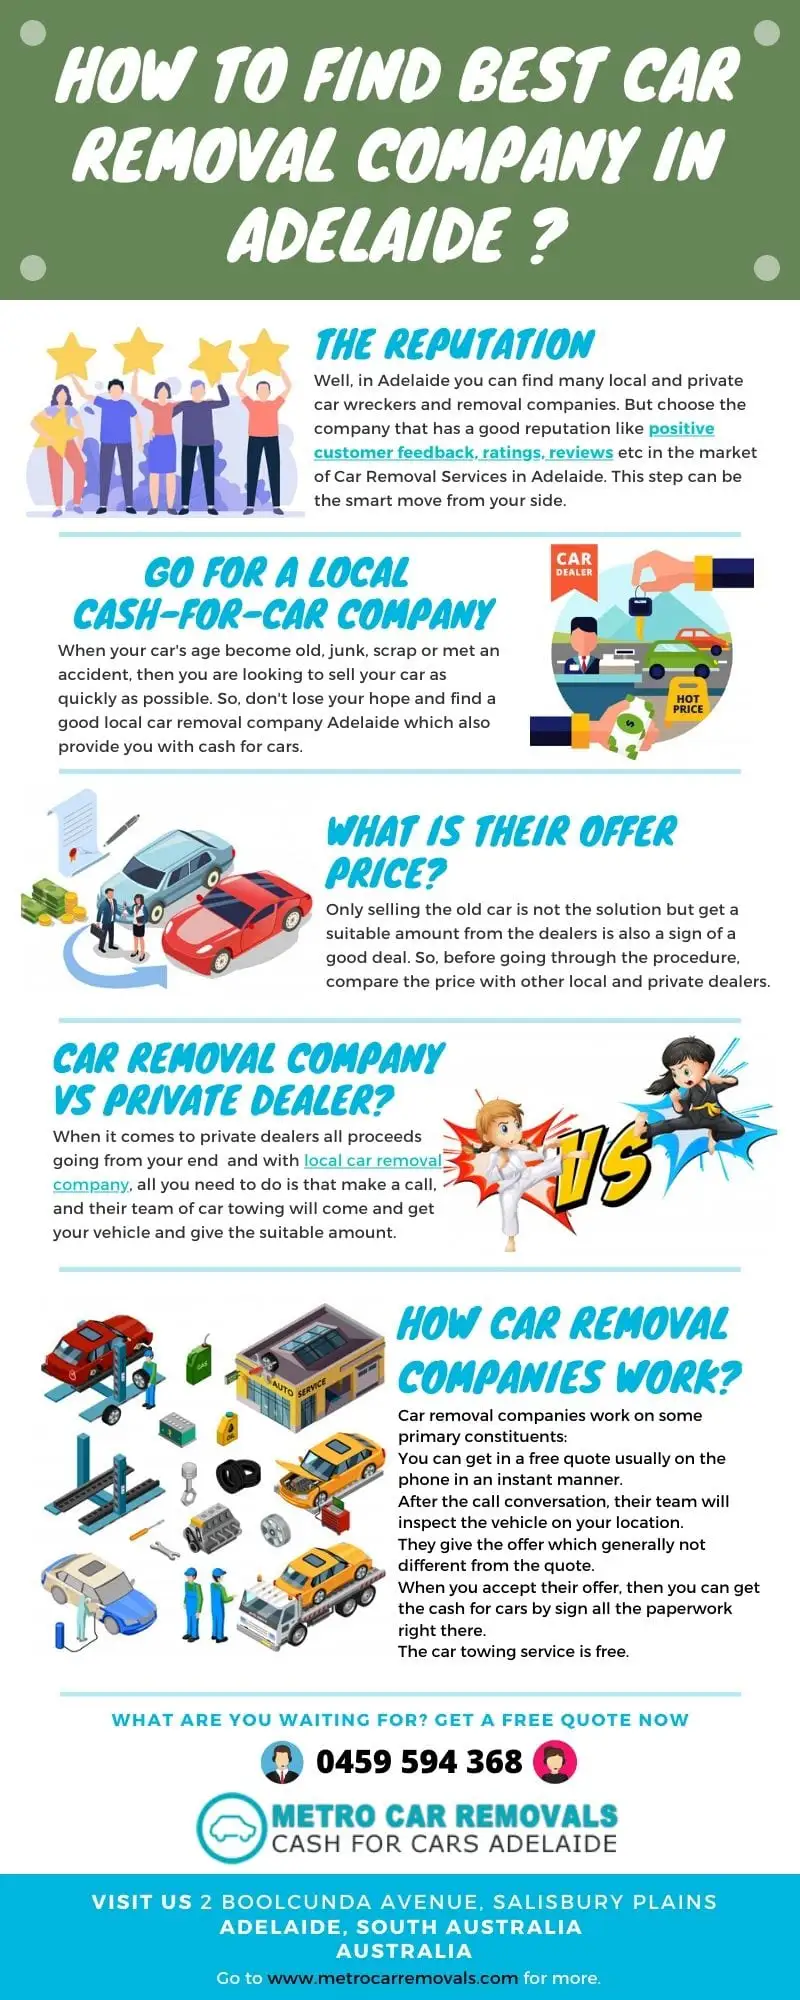 How to find best Car Removal Company in adelaide